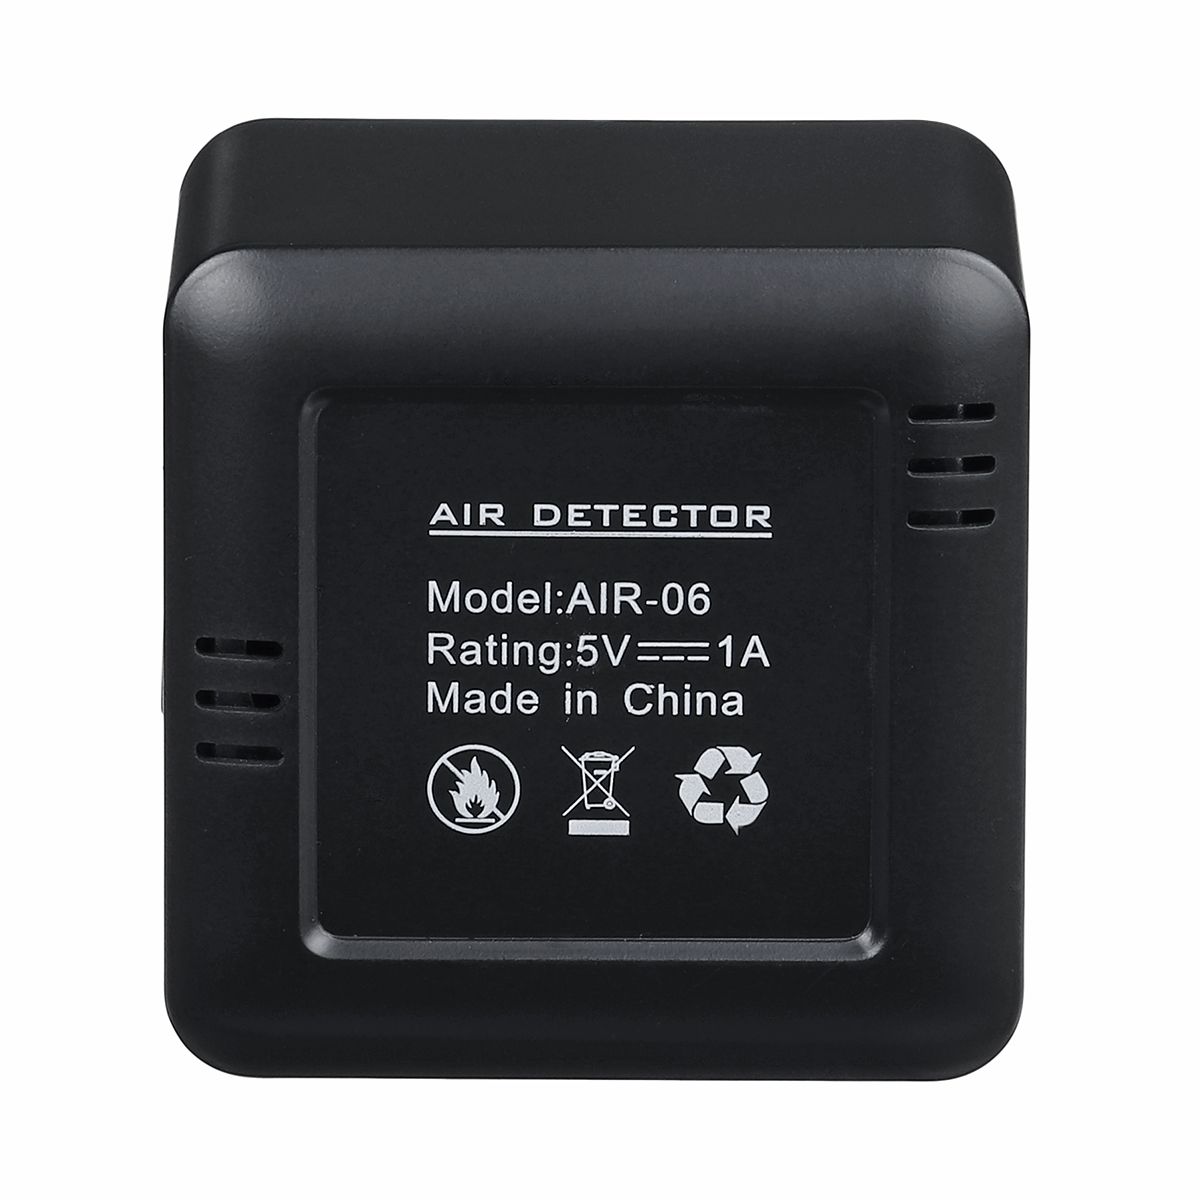 Air-Quality-Laser-PM25-Monitor-Detector-HCHO-TVOC-CO2-Tester-OLED-Screen-Home-1652932